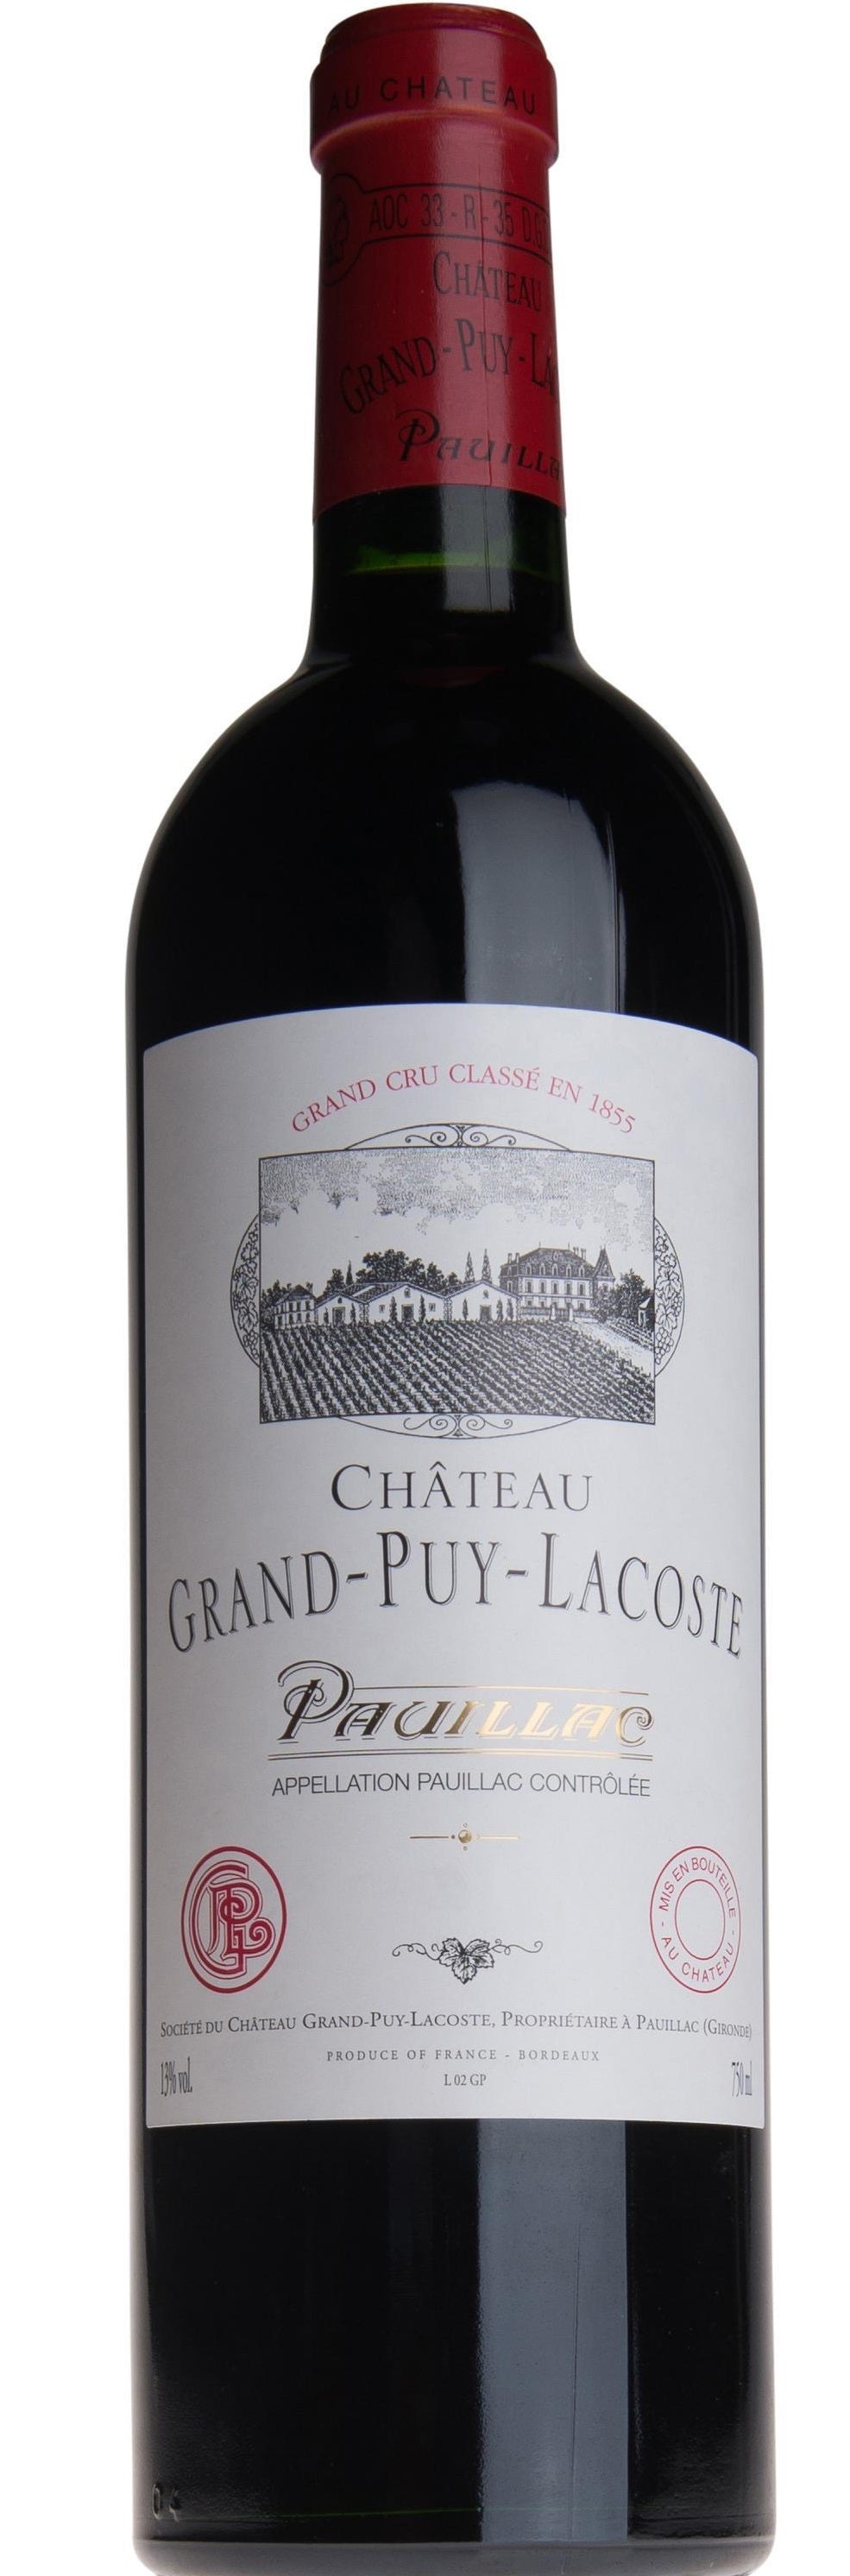 Chateau Grand-Puy-Lacoste Pauillac 2006